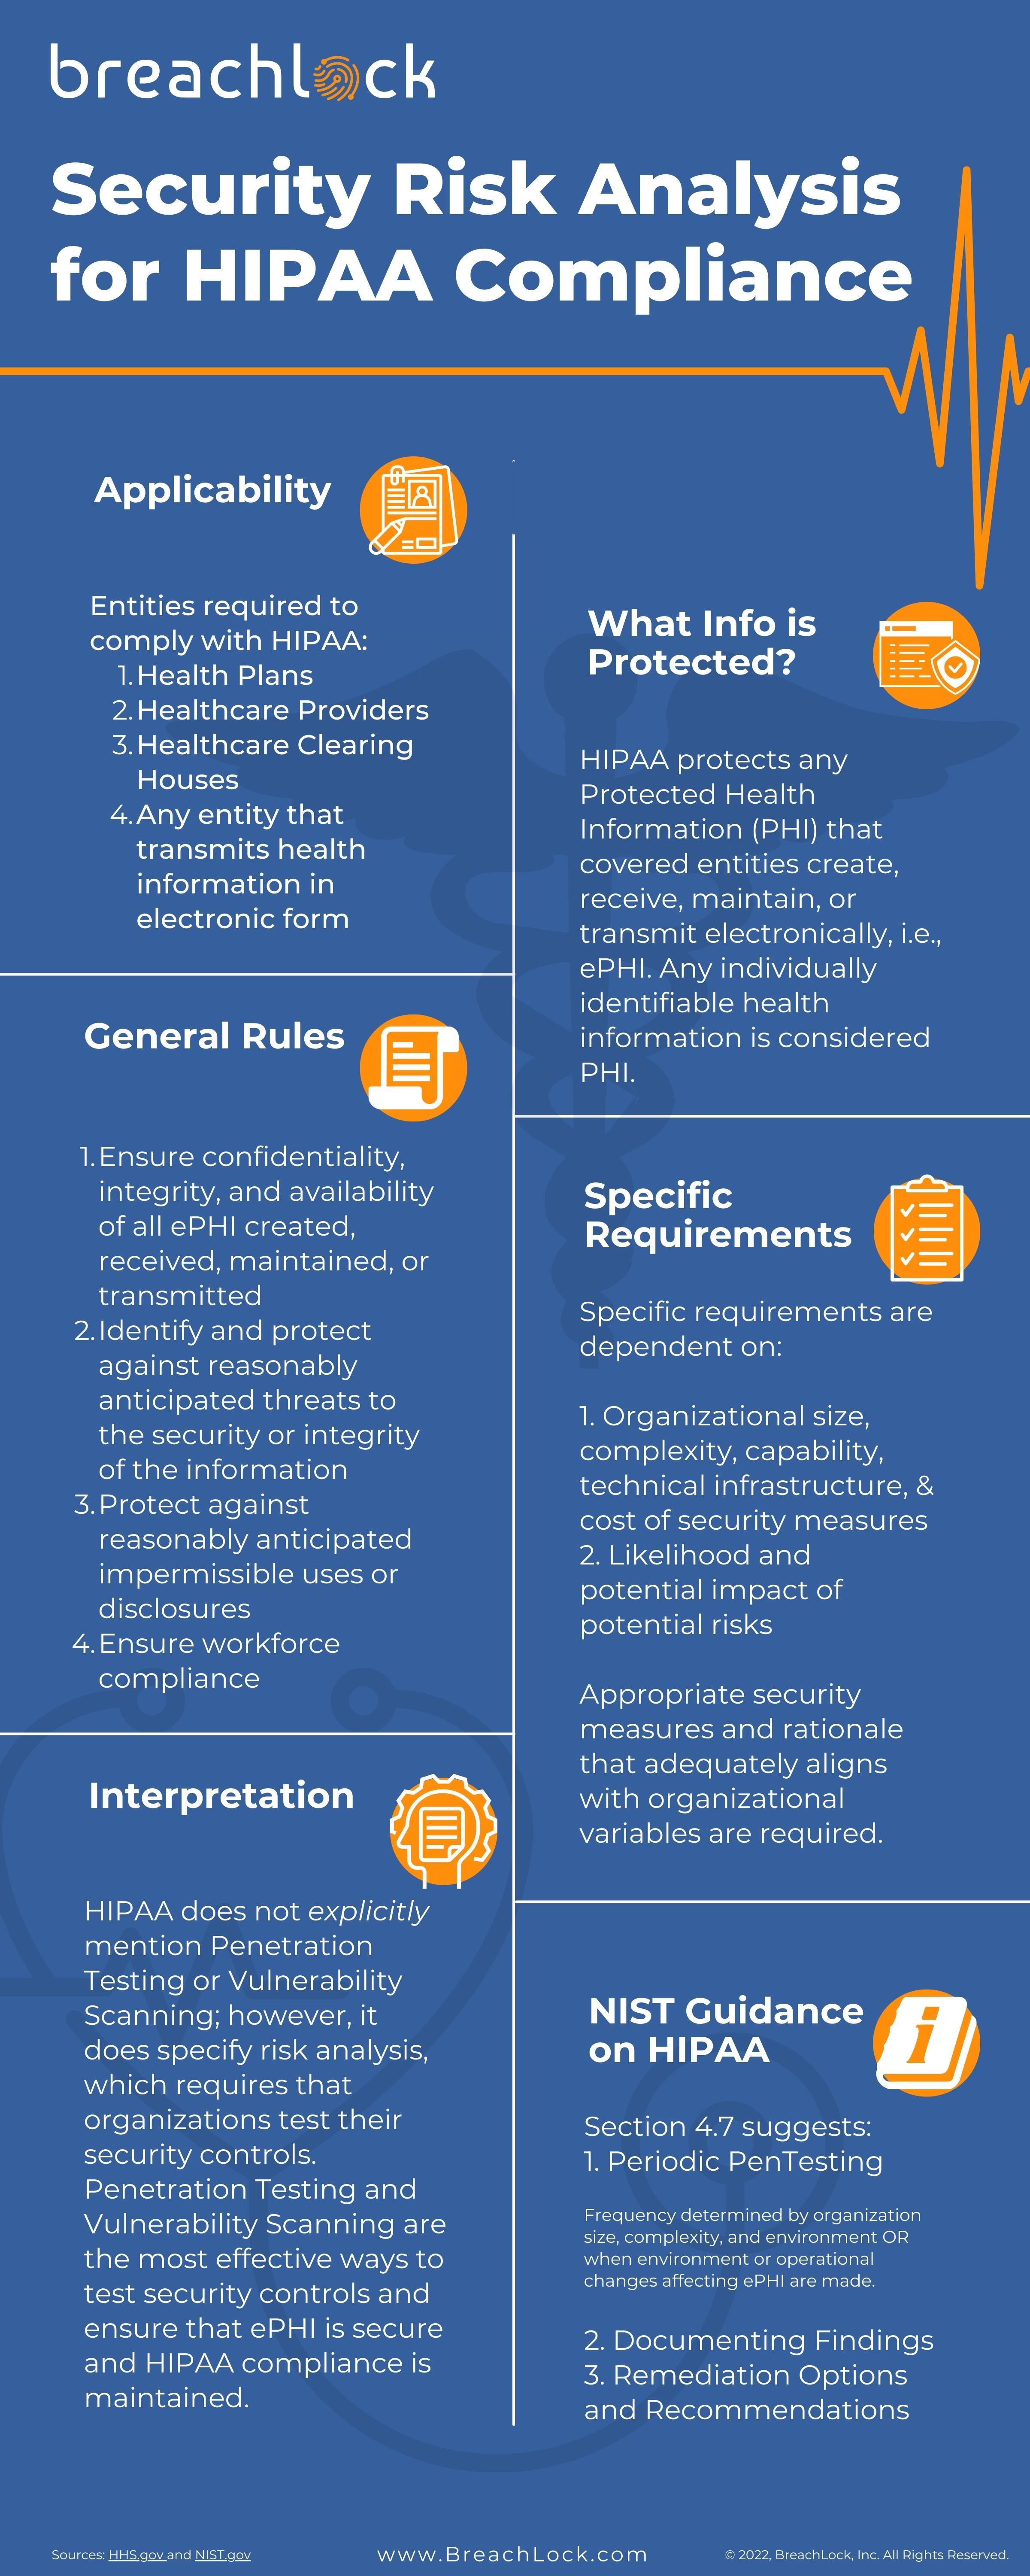 Security Risk Analysis for HIPAA Compliance